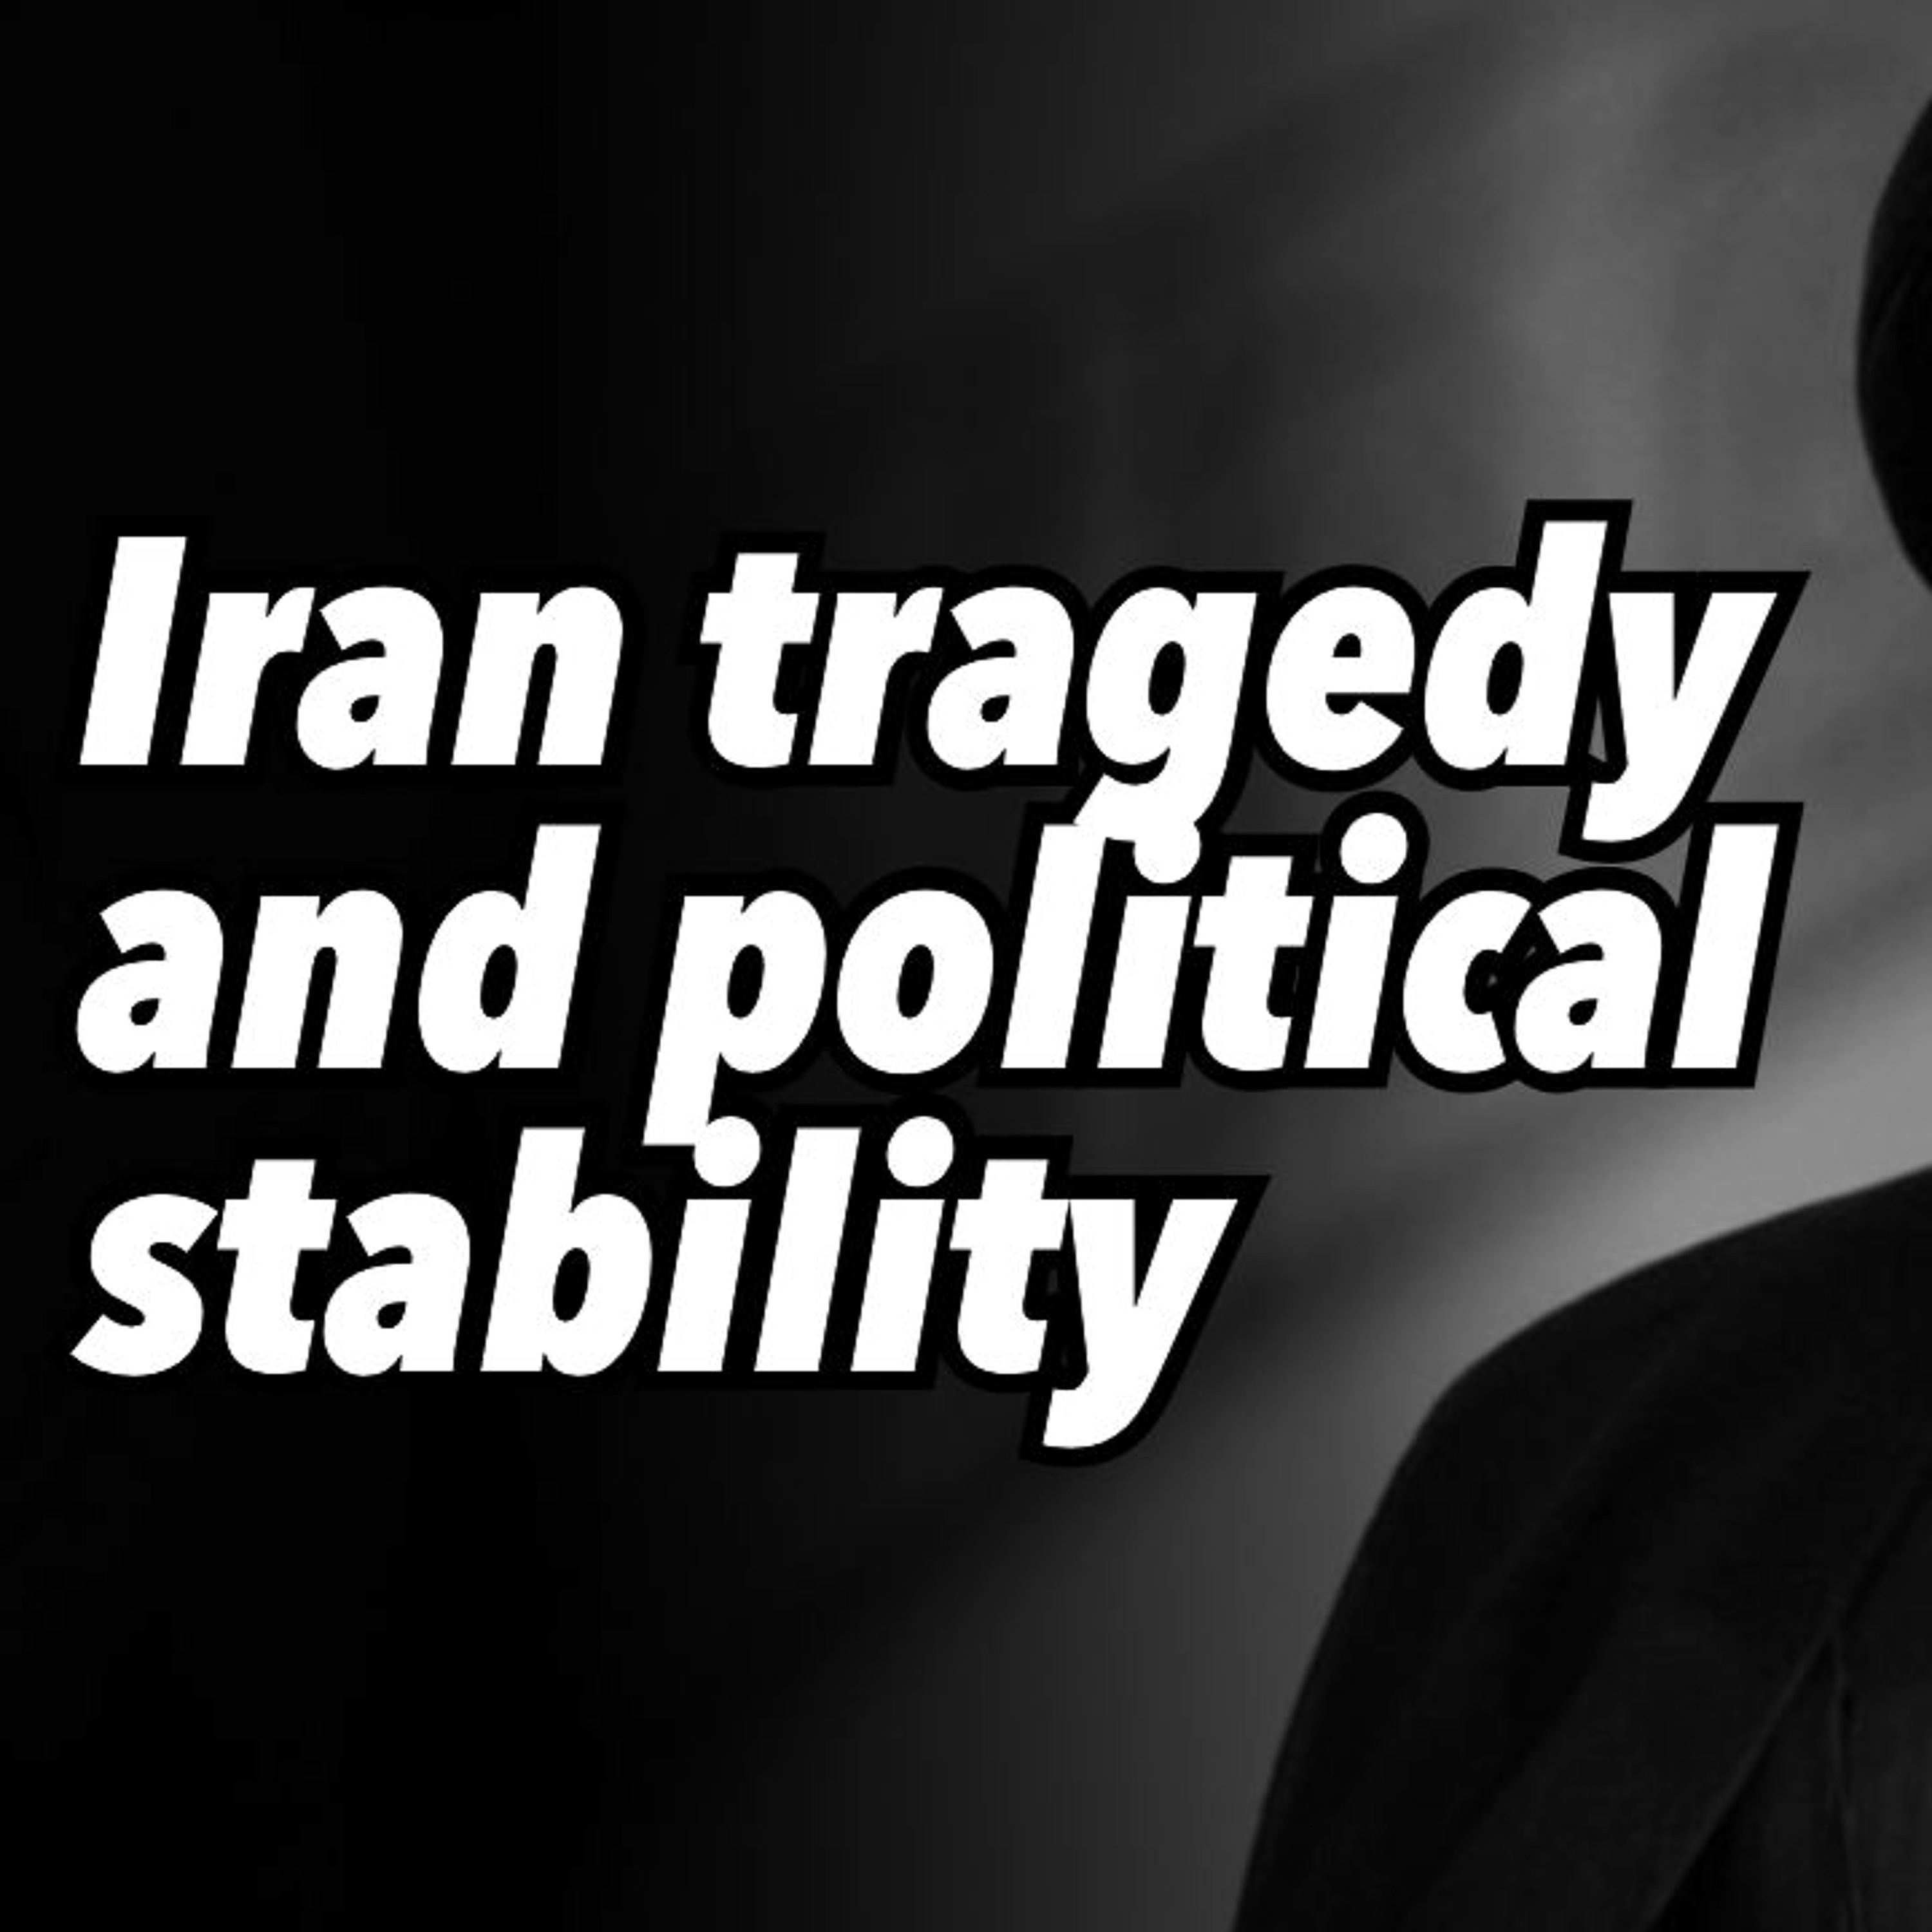 Iran tragedy and political stability